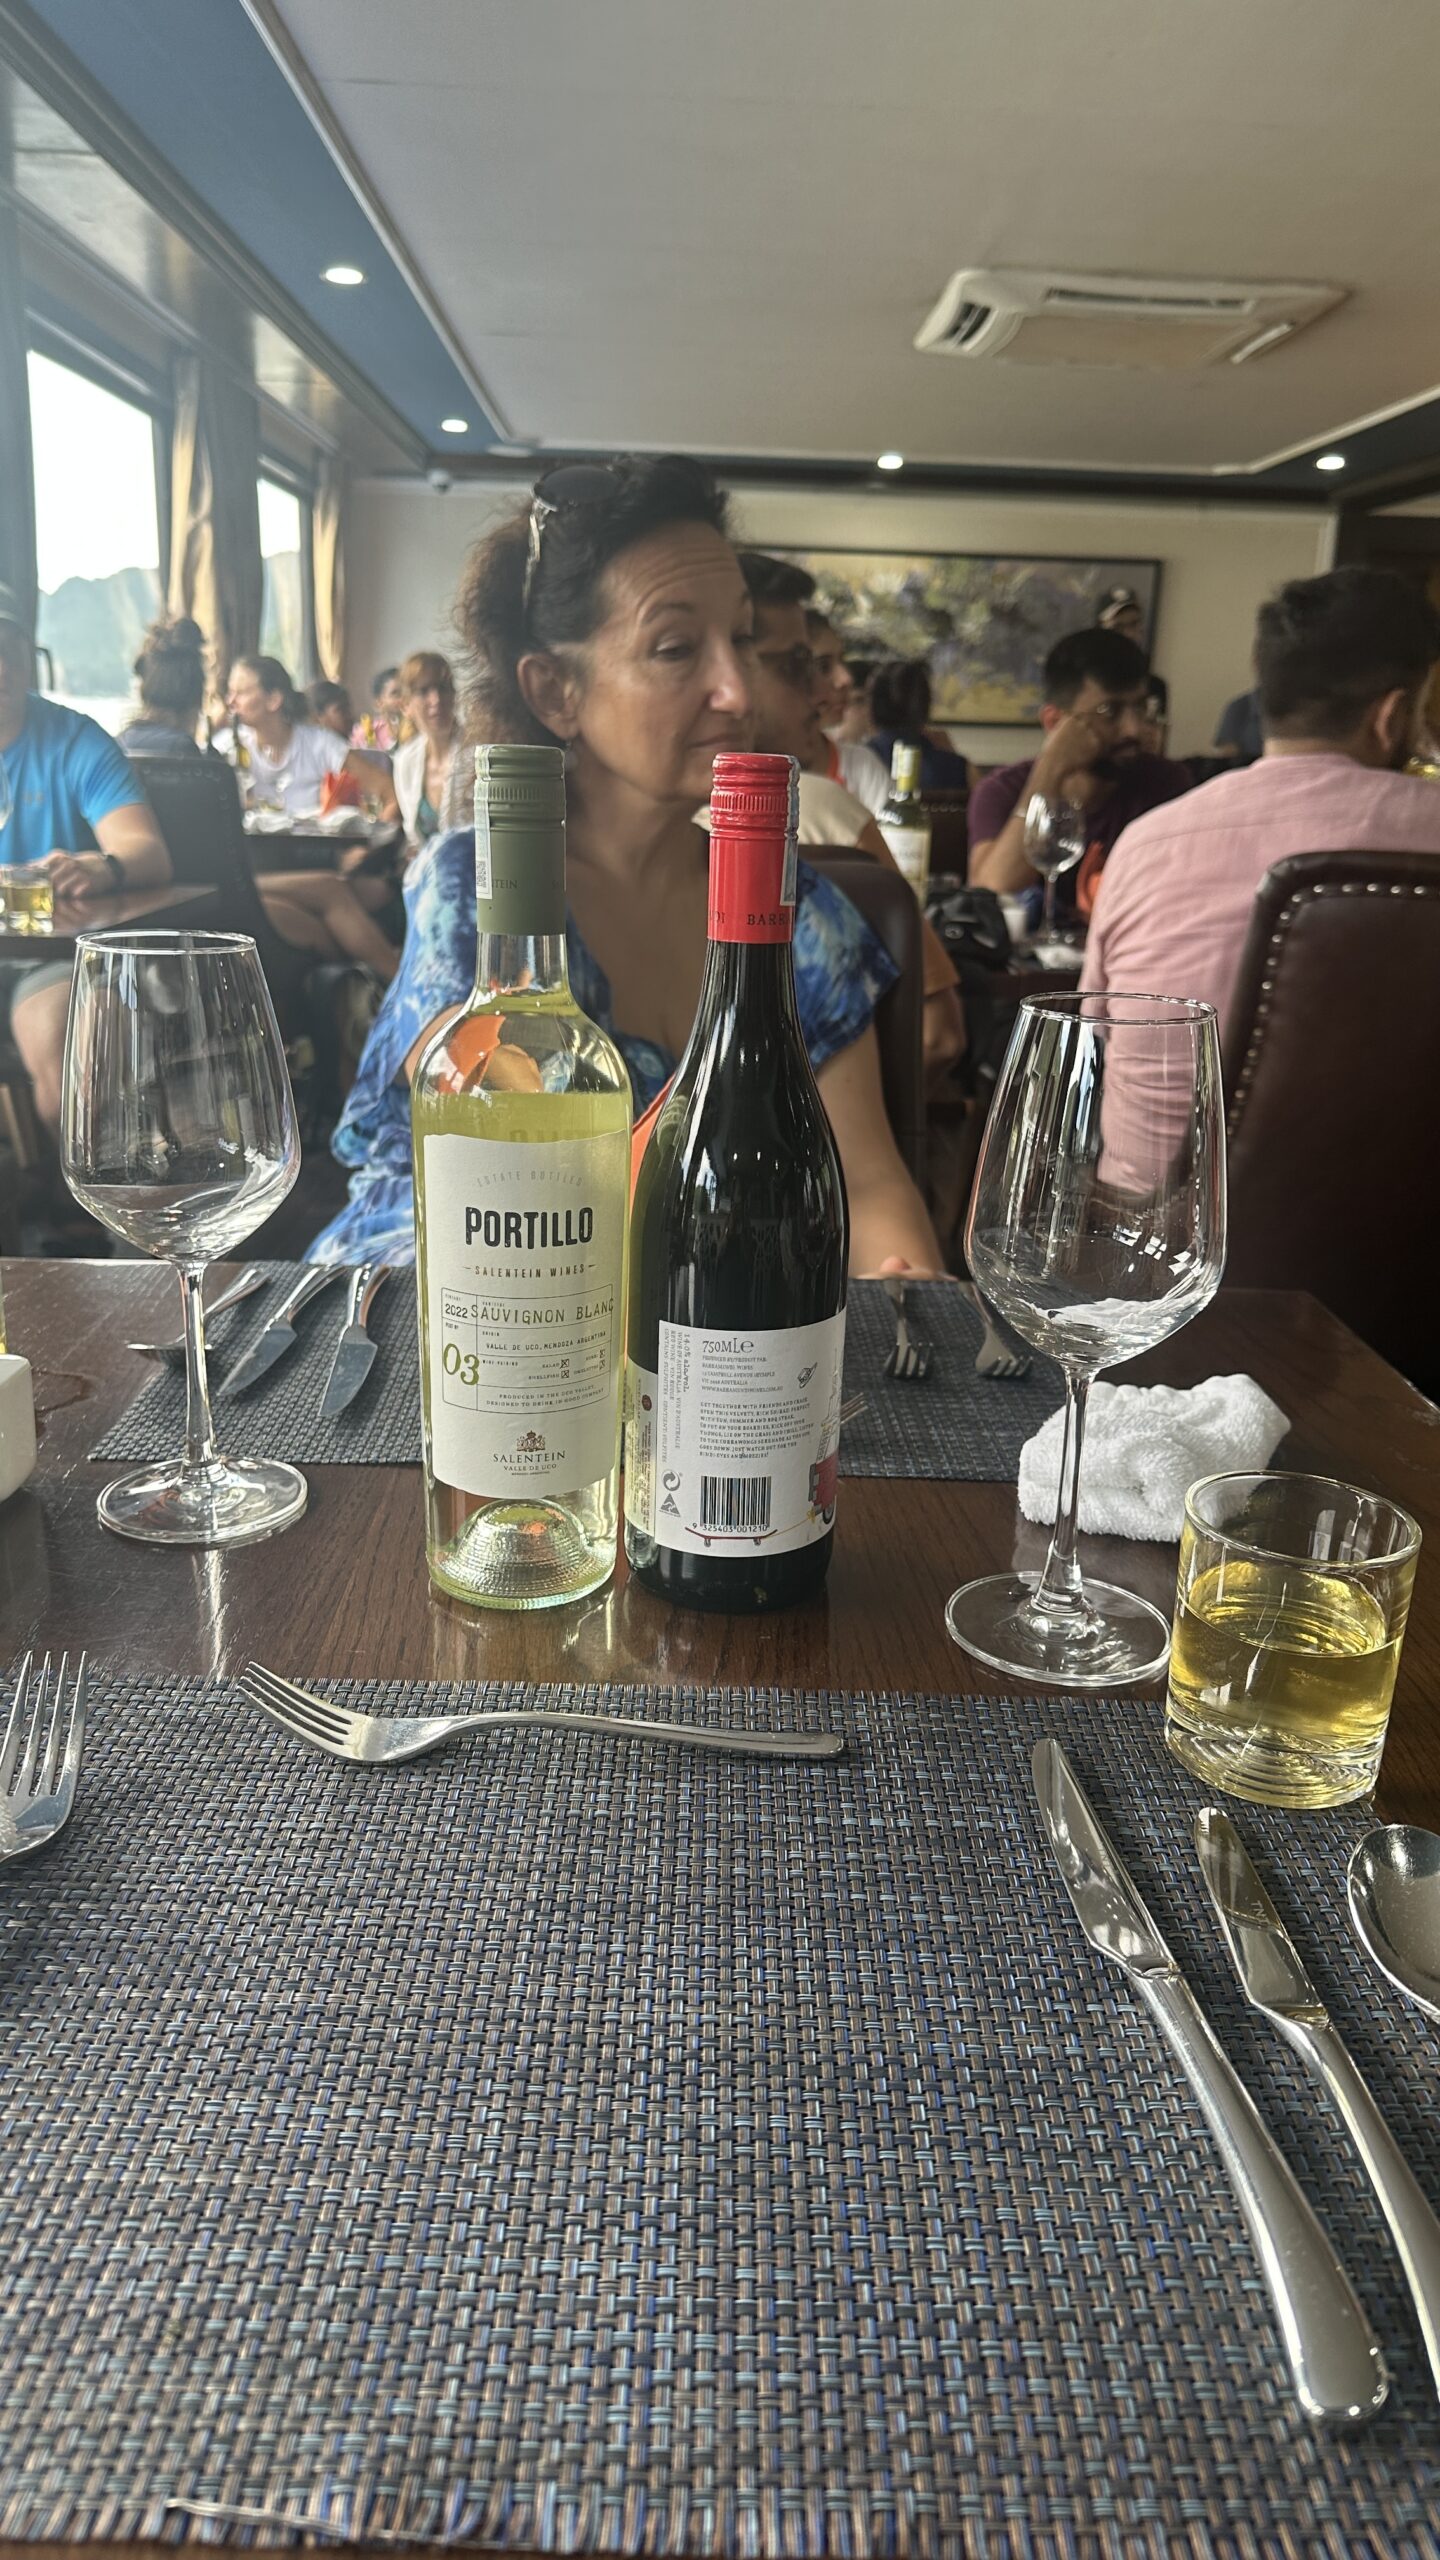 Image of a bottle of POTILLO SALENTEIN WINES, a French wine brand, placed on a table at a restaurant of Ha Long Bay, Vietnam.